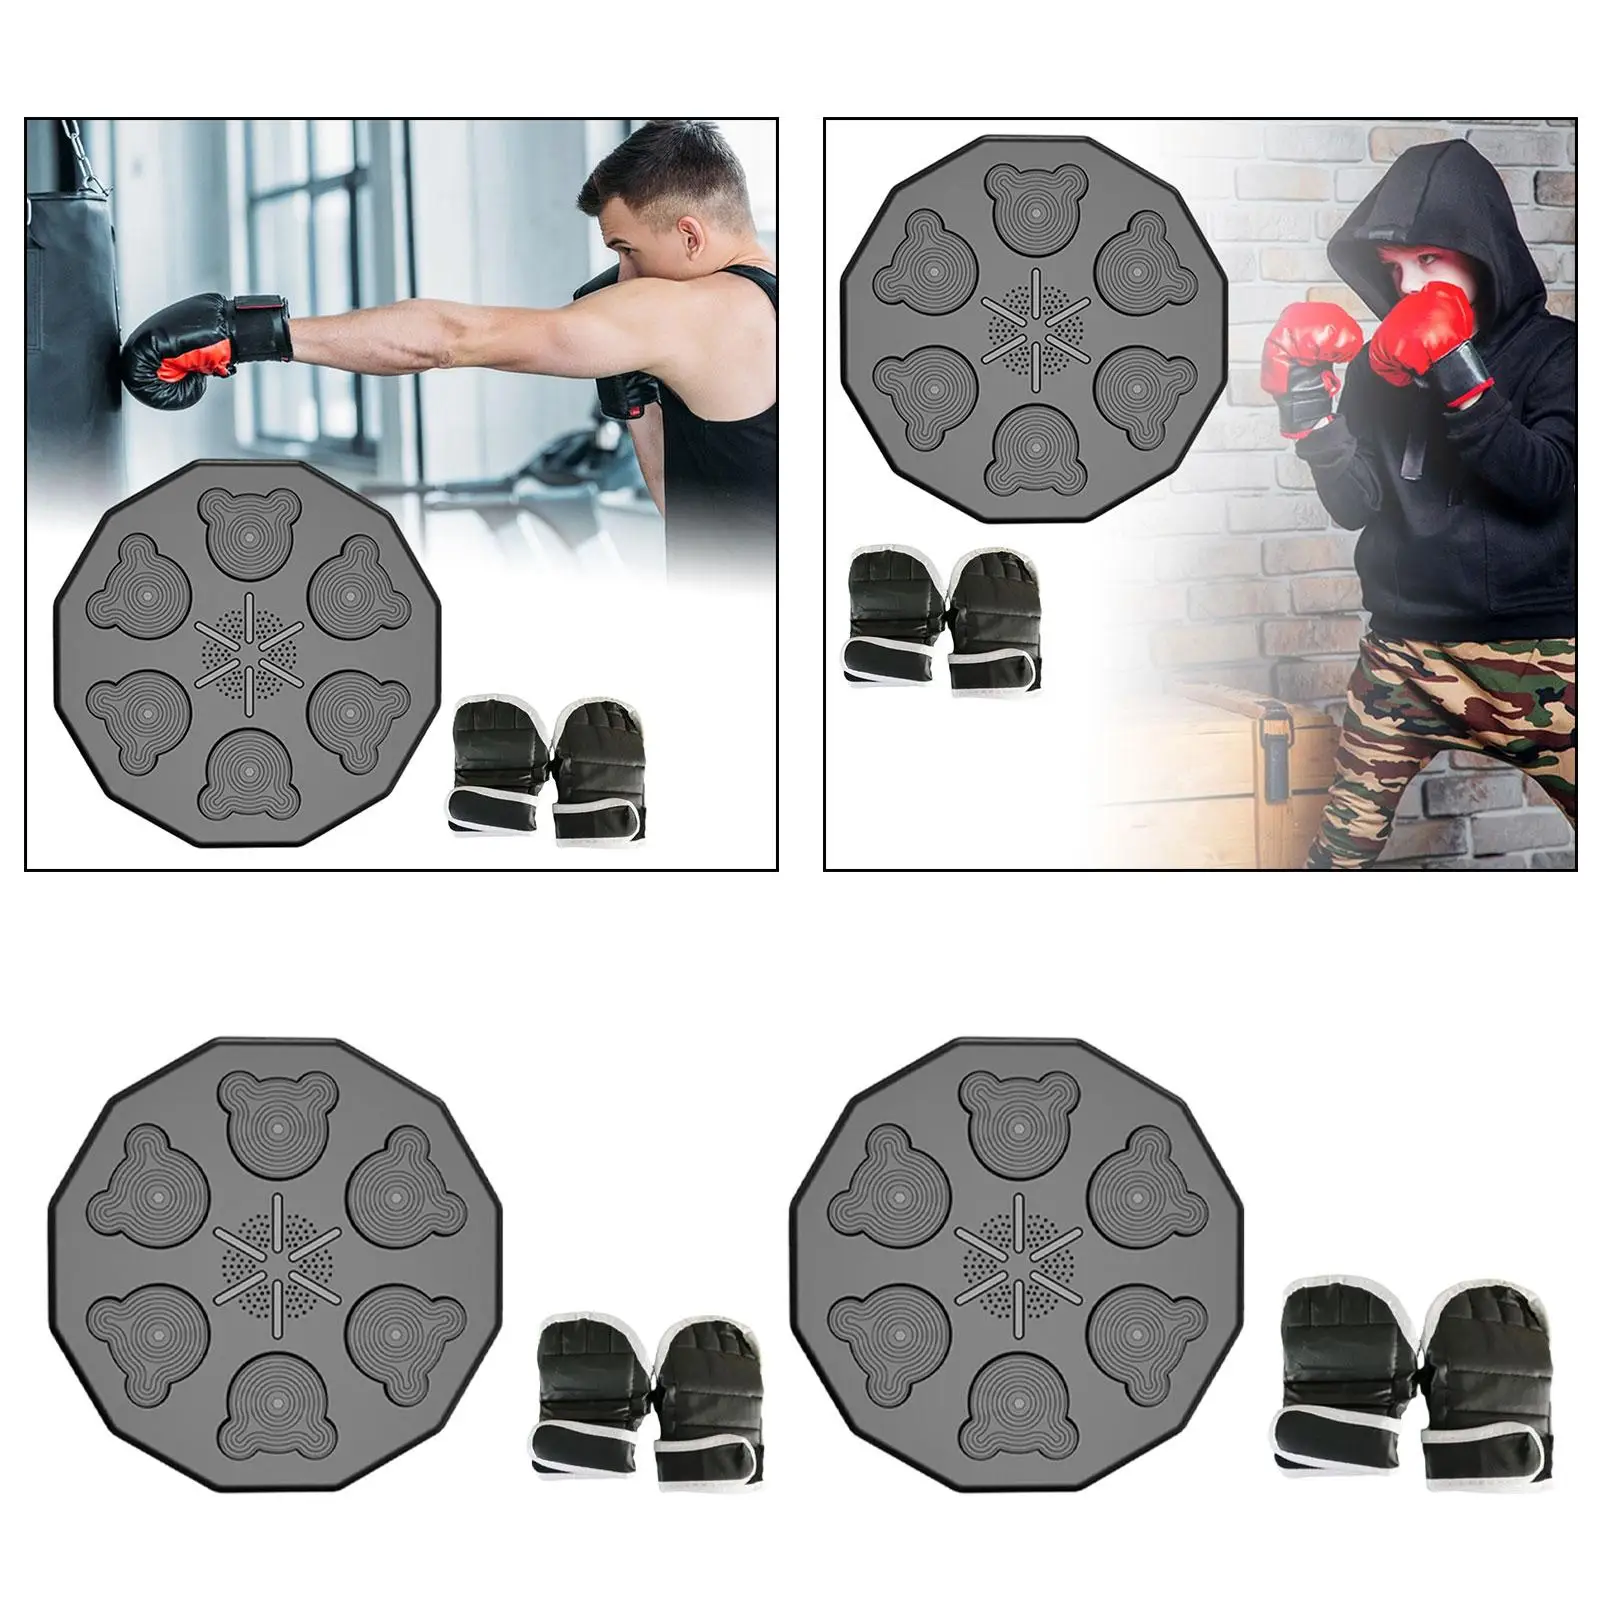 Music Boxing Training Machine with Boxing Gloves Electronic Boxing Wall Target for Sanda Martial Arts Taekwondo Indoor Sports